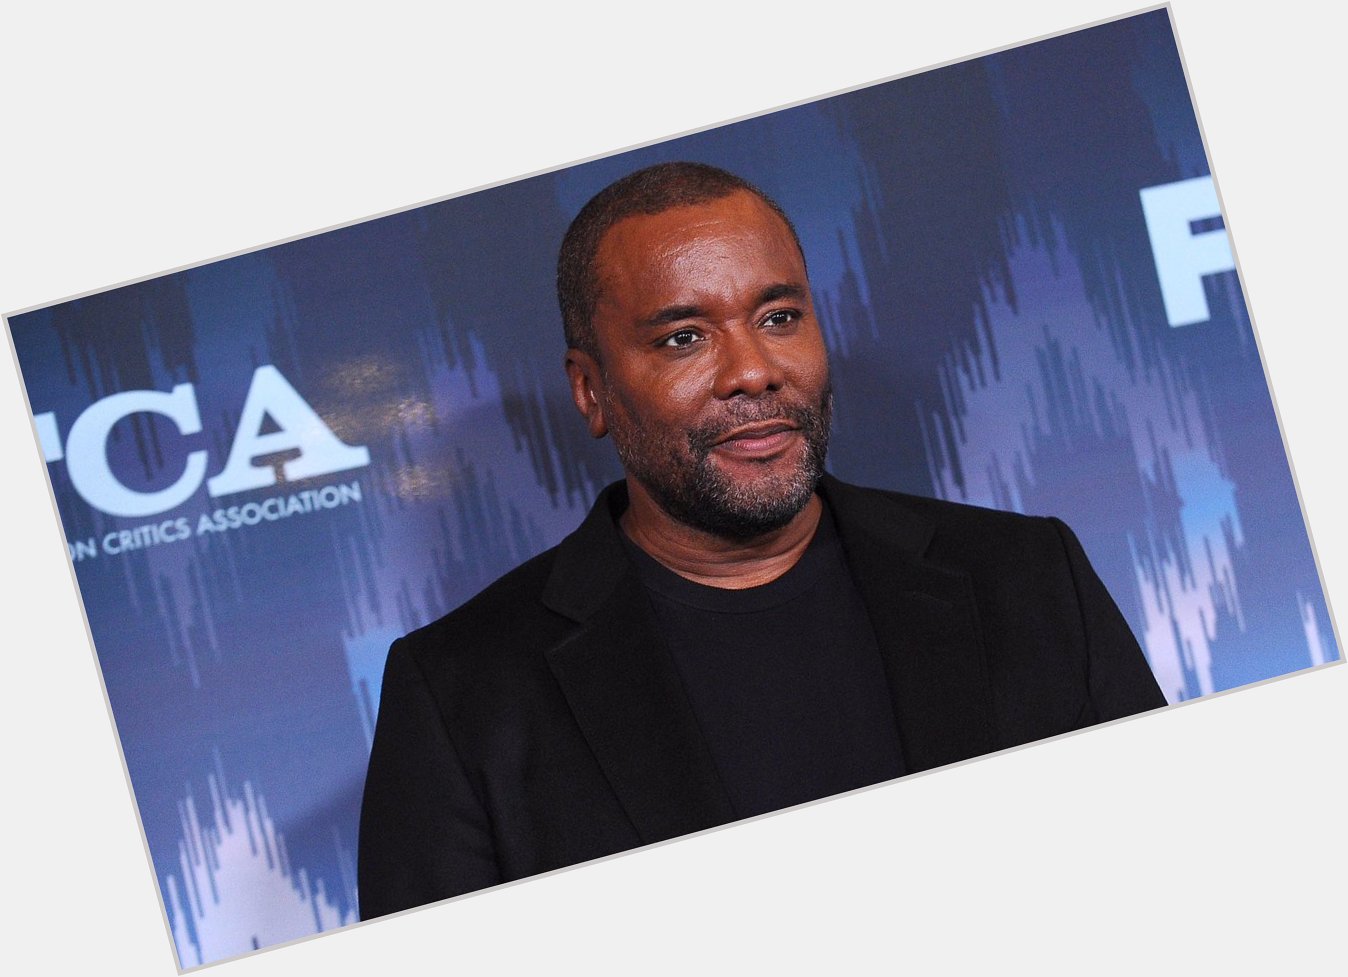 Happy 59th birthday to this film producer and director, Lee Daniels! 